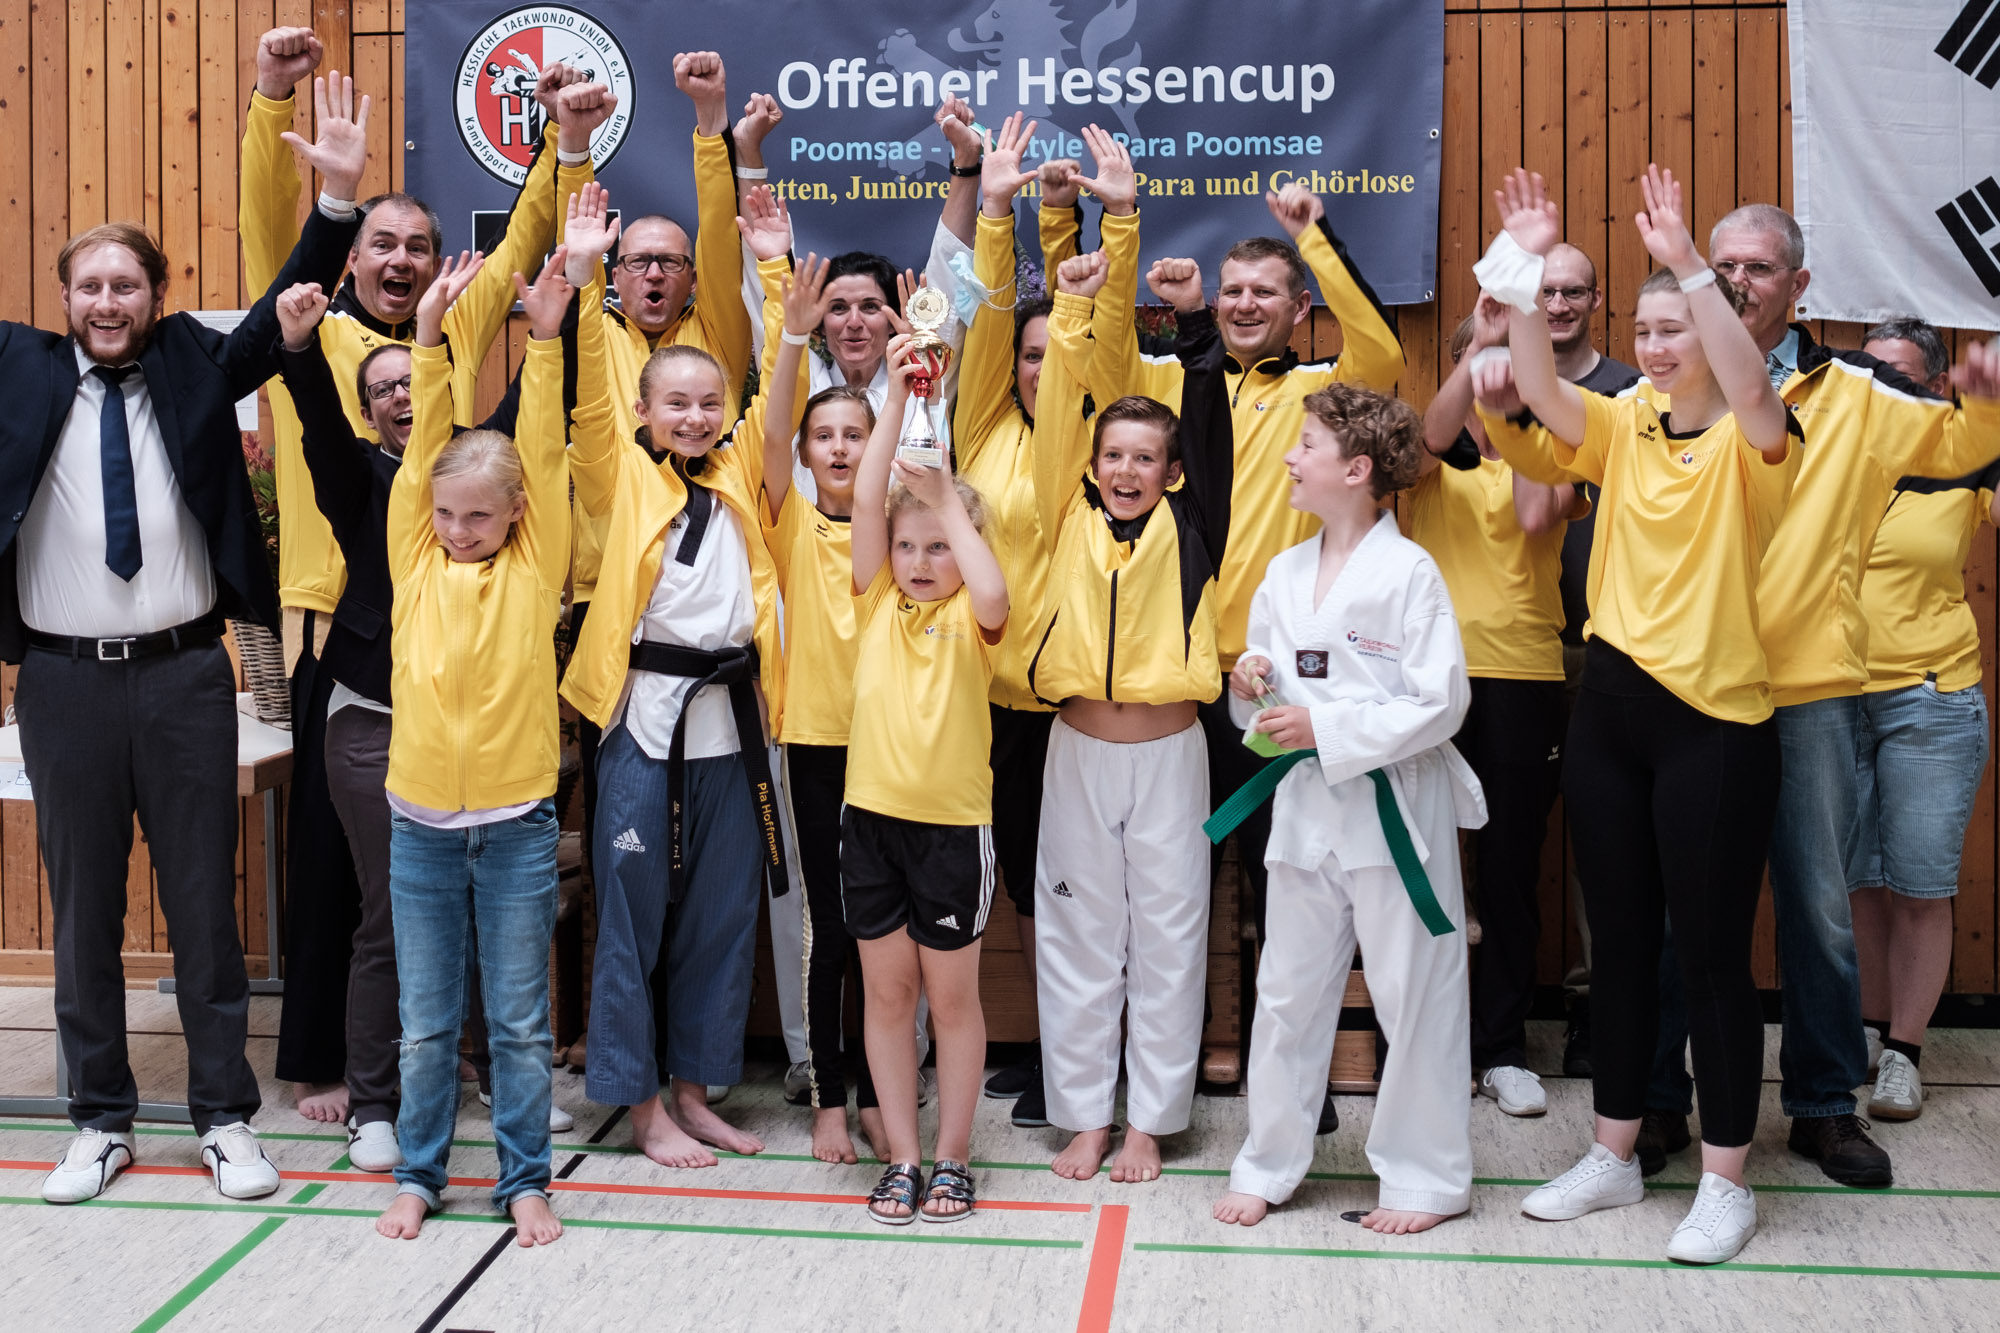 Offene Hessencup 2021